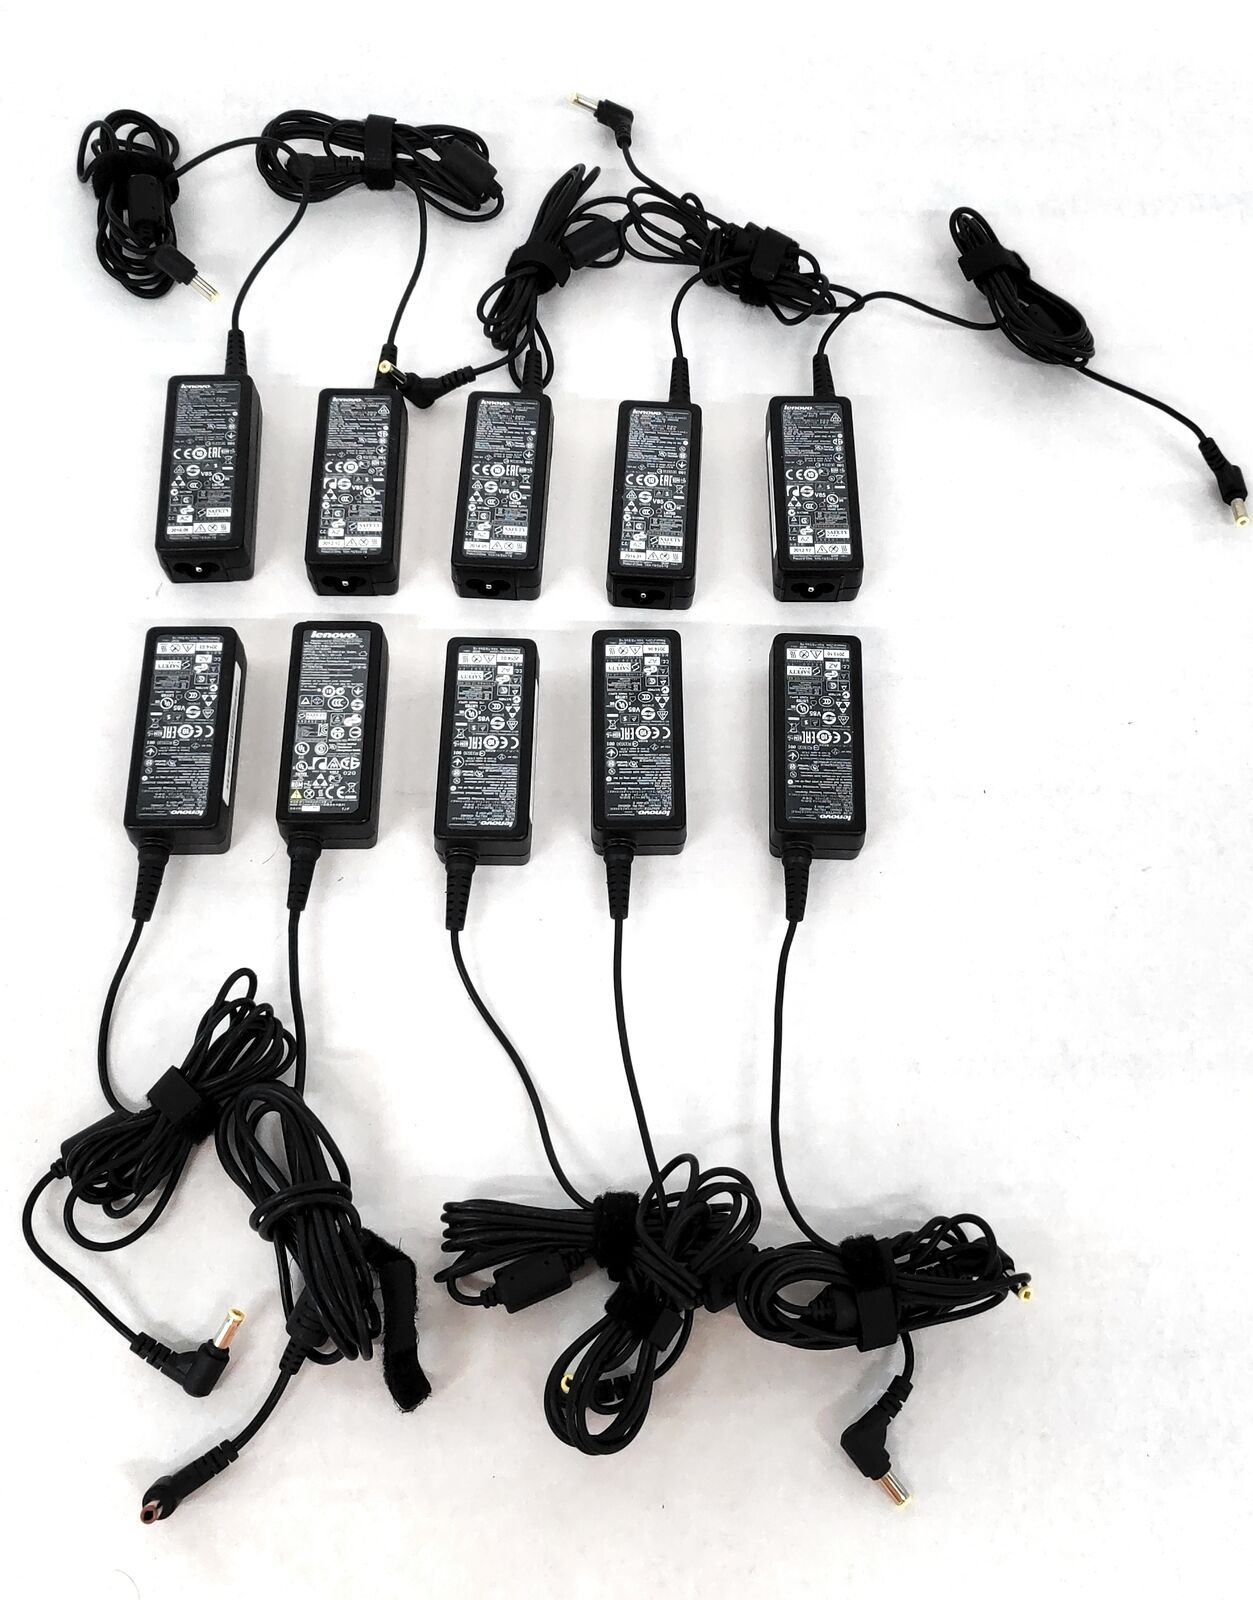 Lot of 10 OEM Lenovo 40W 20V Ideapad Laptop Chargers 5.5MM AC Power Adapter